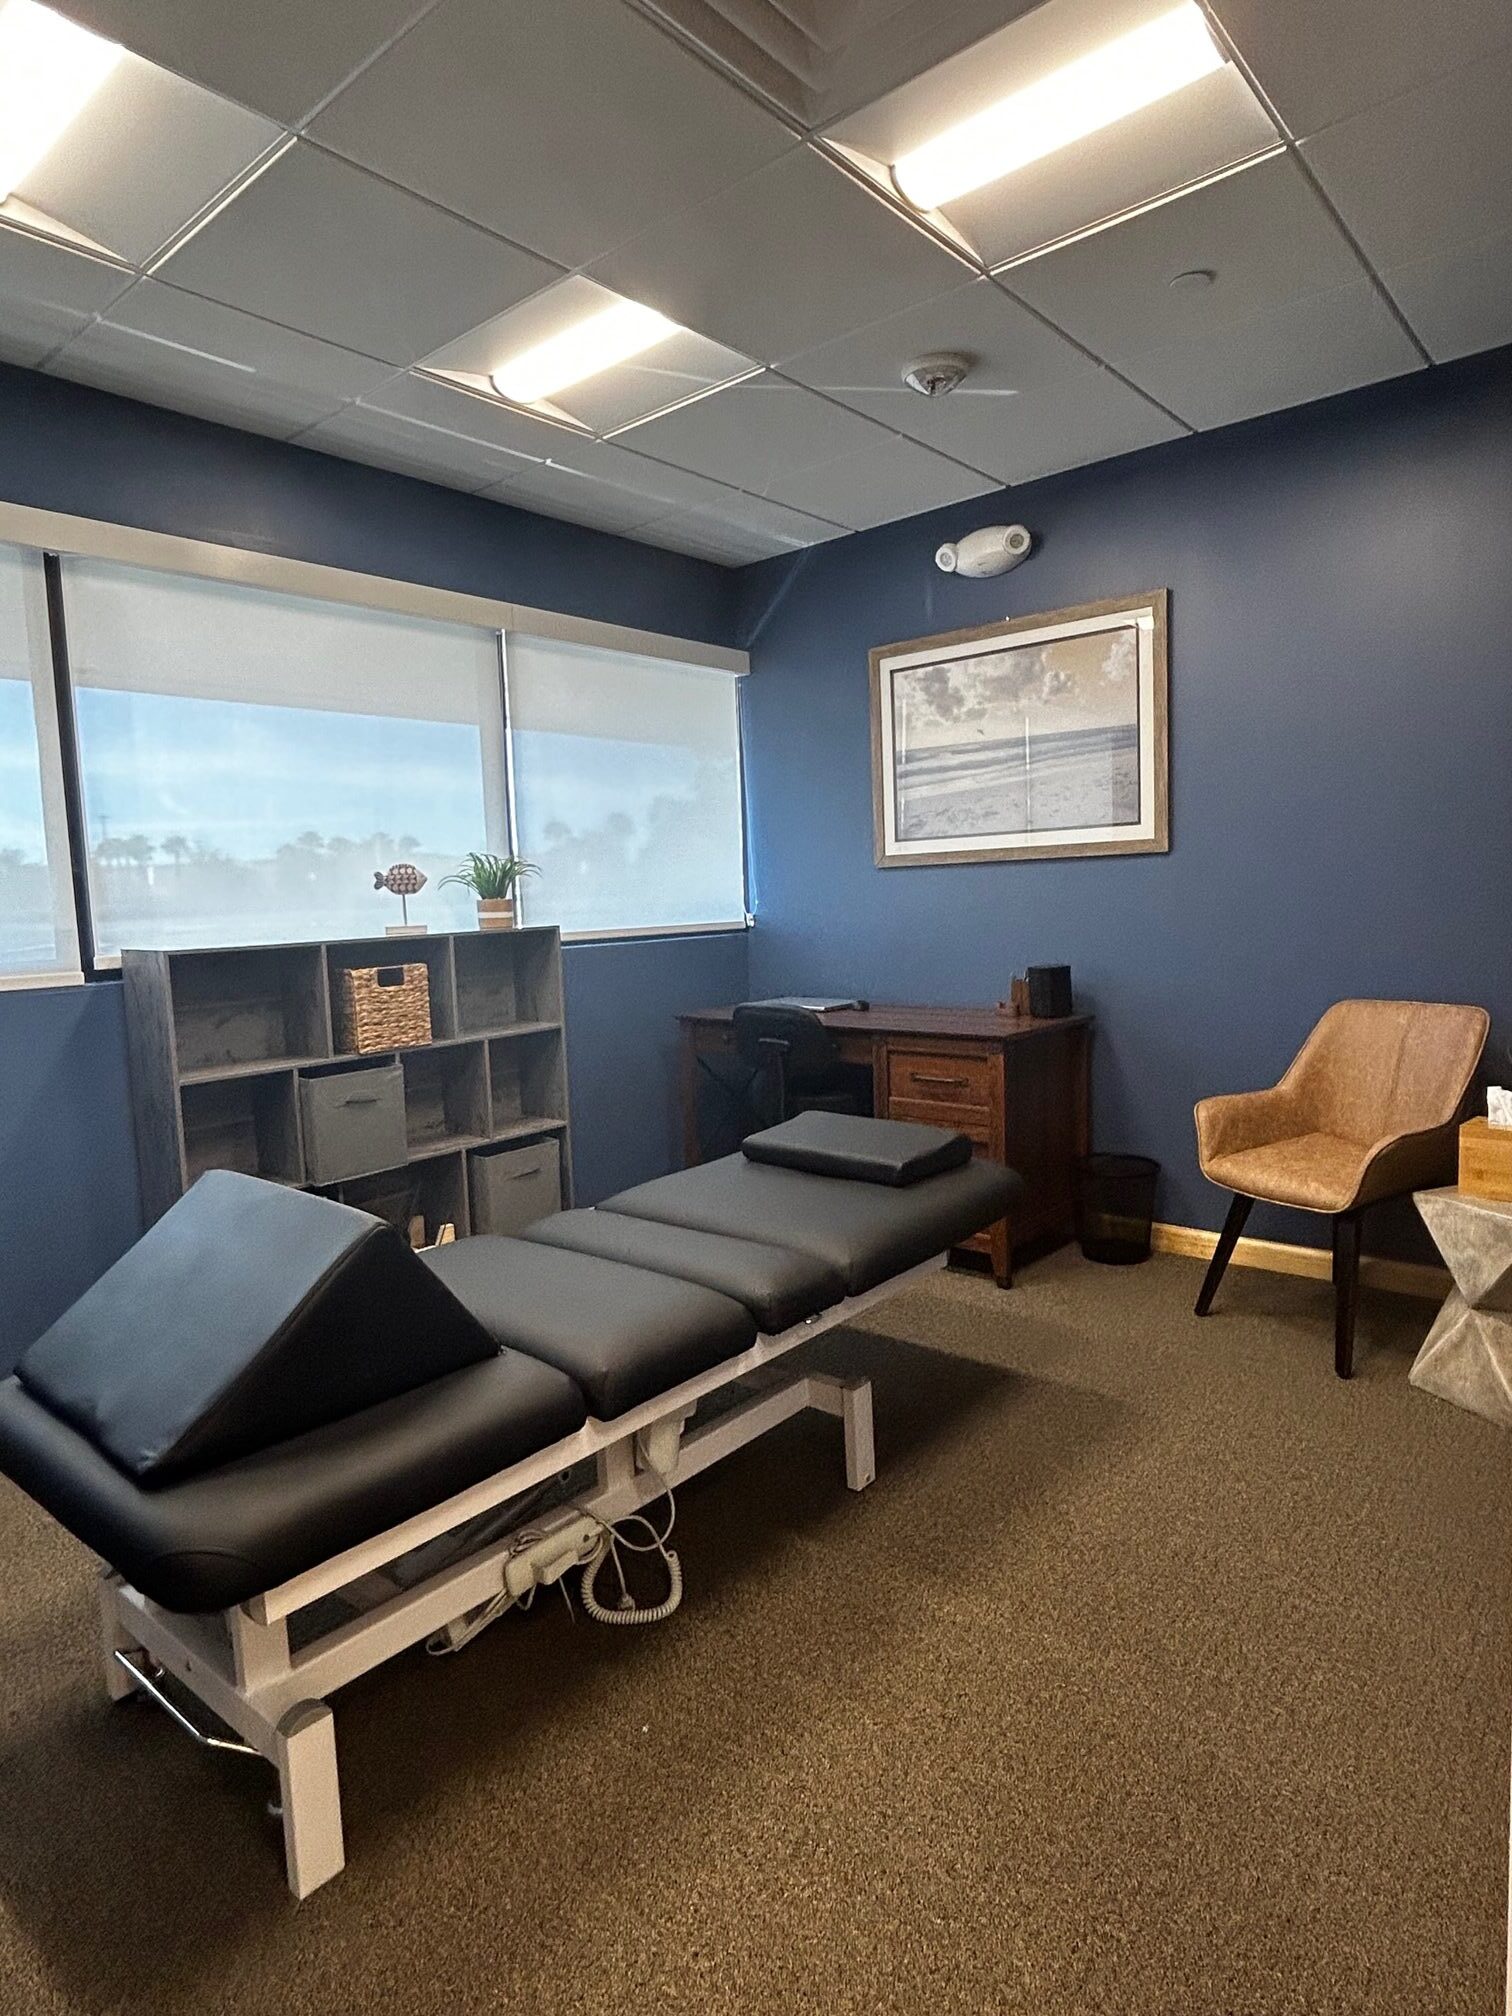 Saylor Physical Therapy - Altamonte Springs